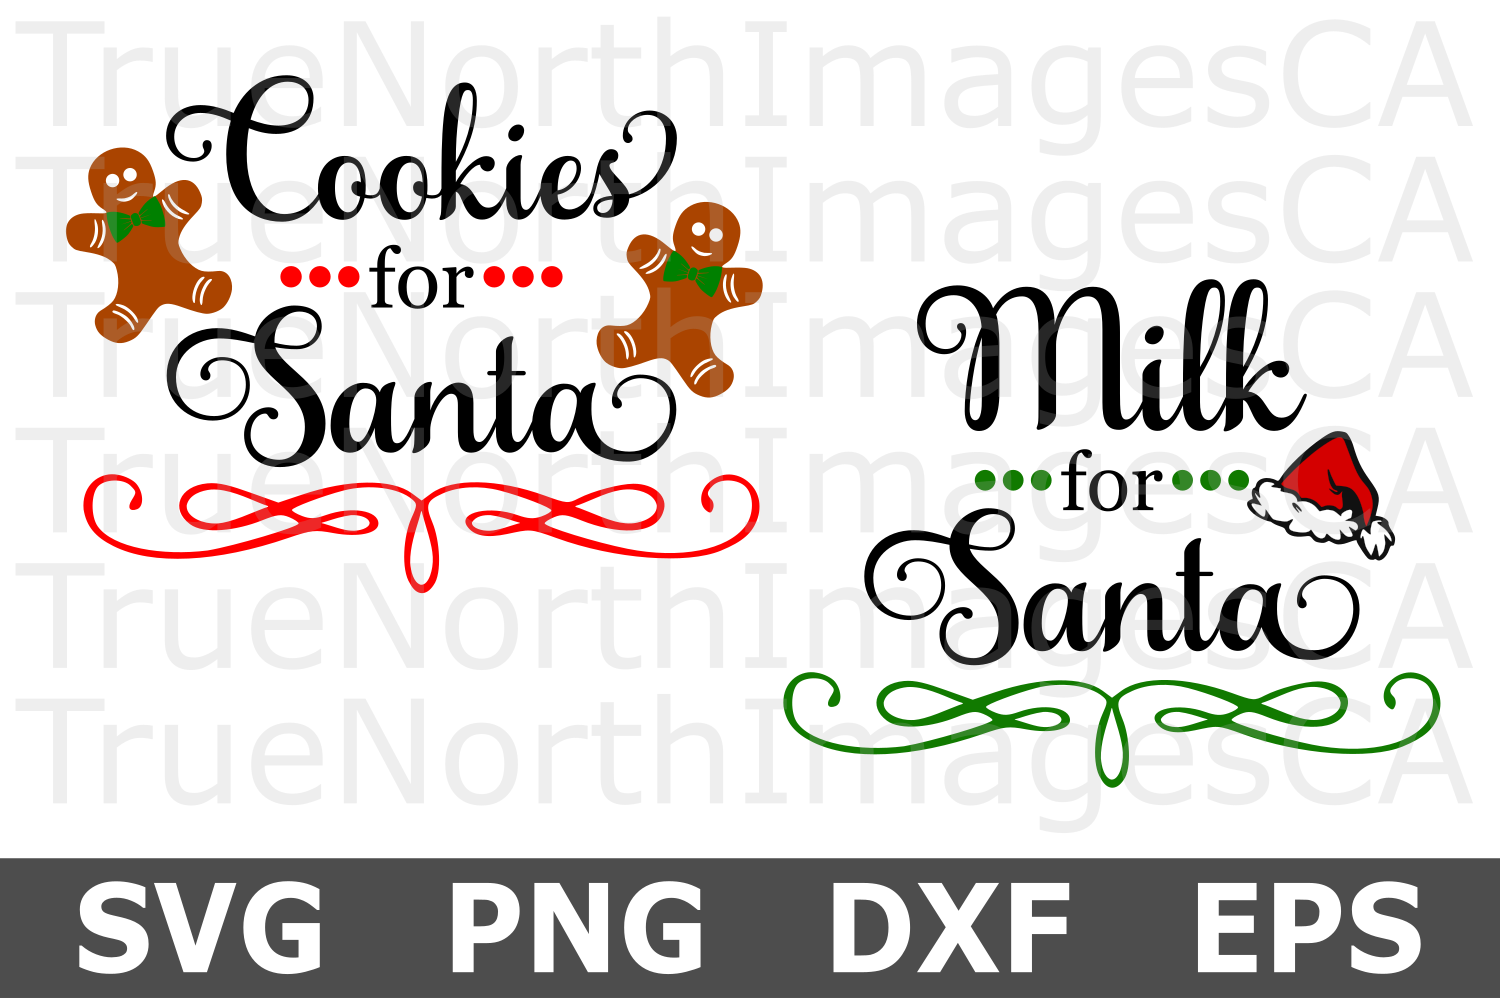 Download Milk and Cookies for Santa - Two Christmas SVG Cut Files